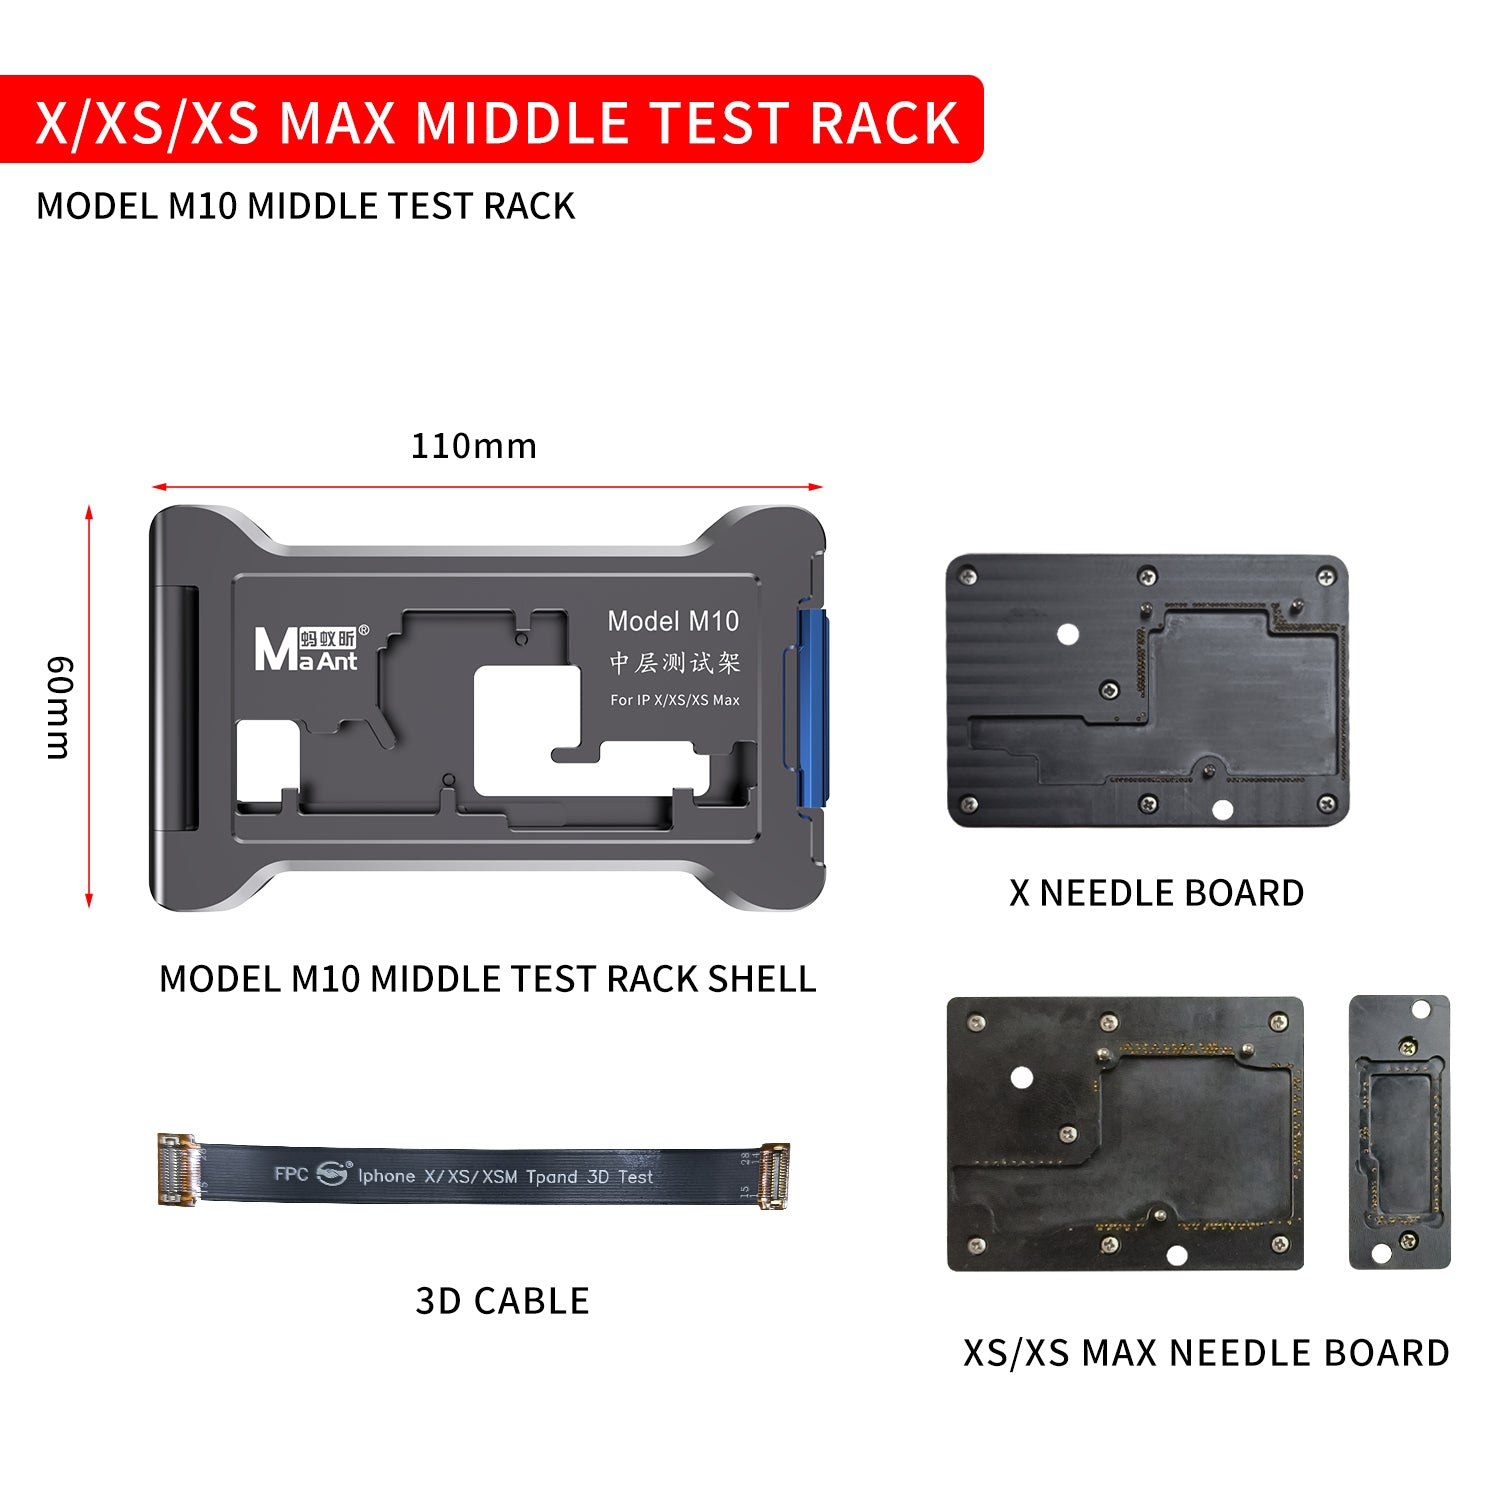 MaAnt M12 Motherboard Layered Test Fixture for iPhone